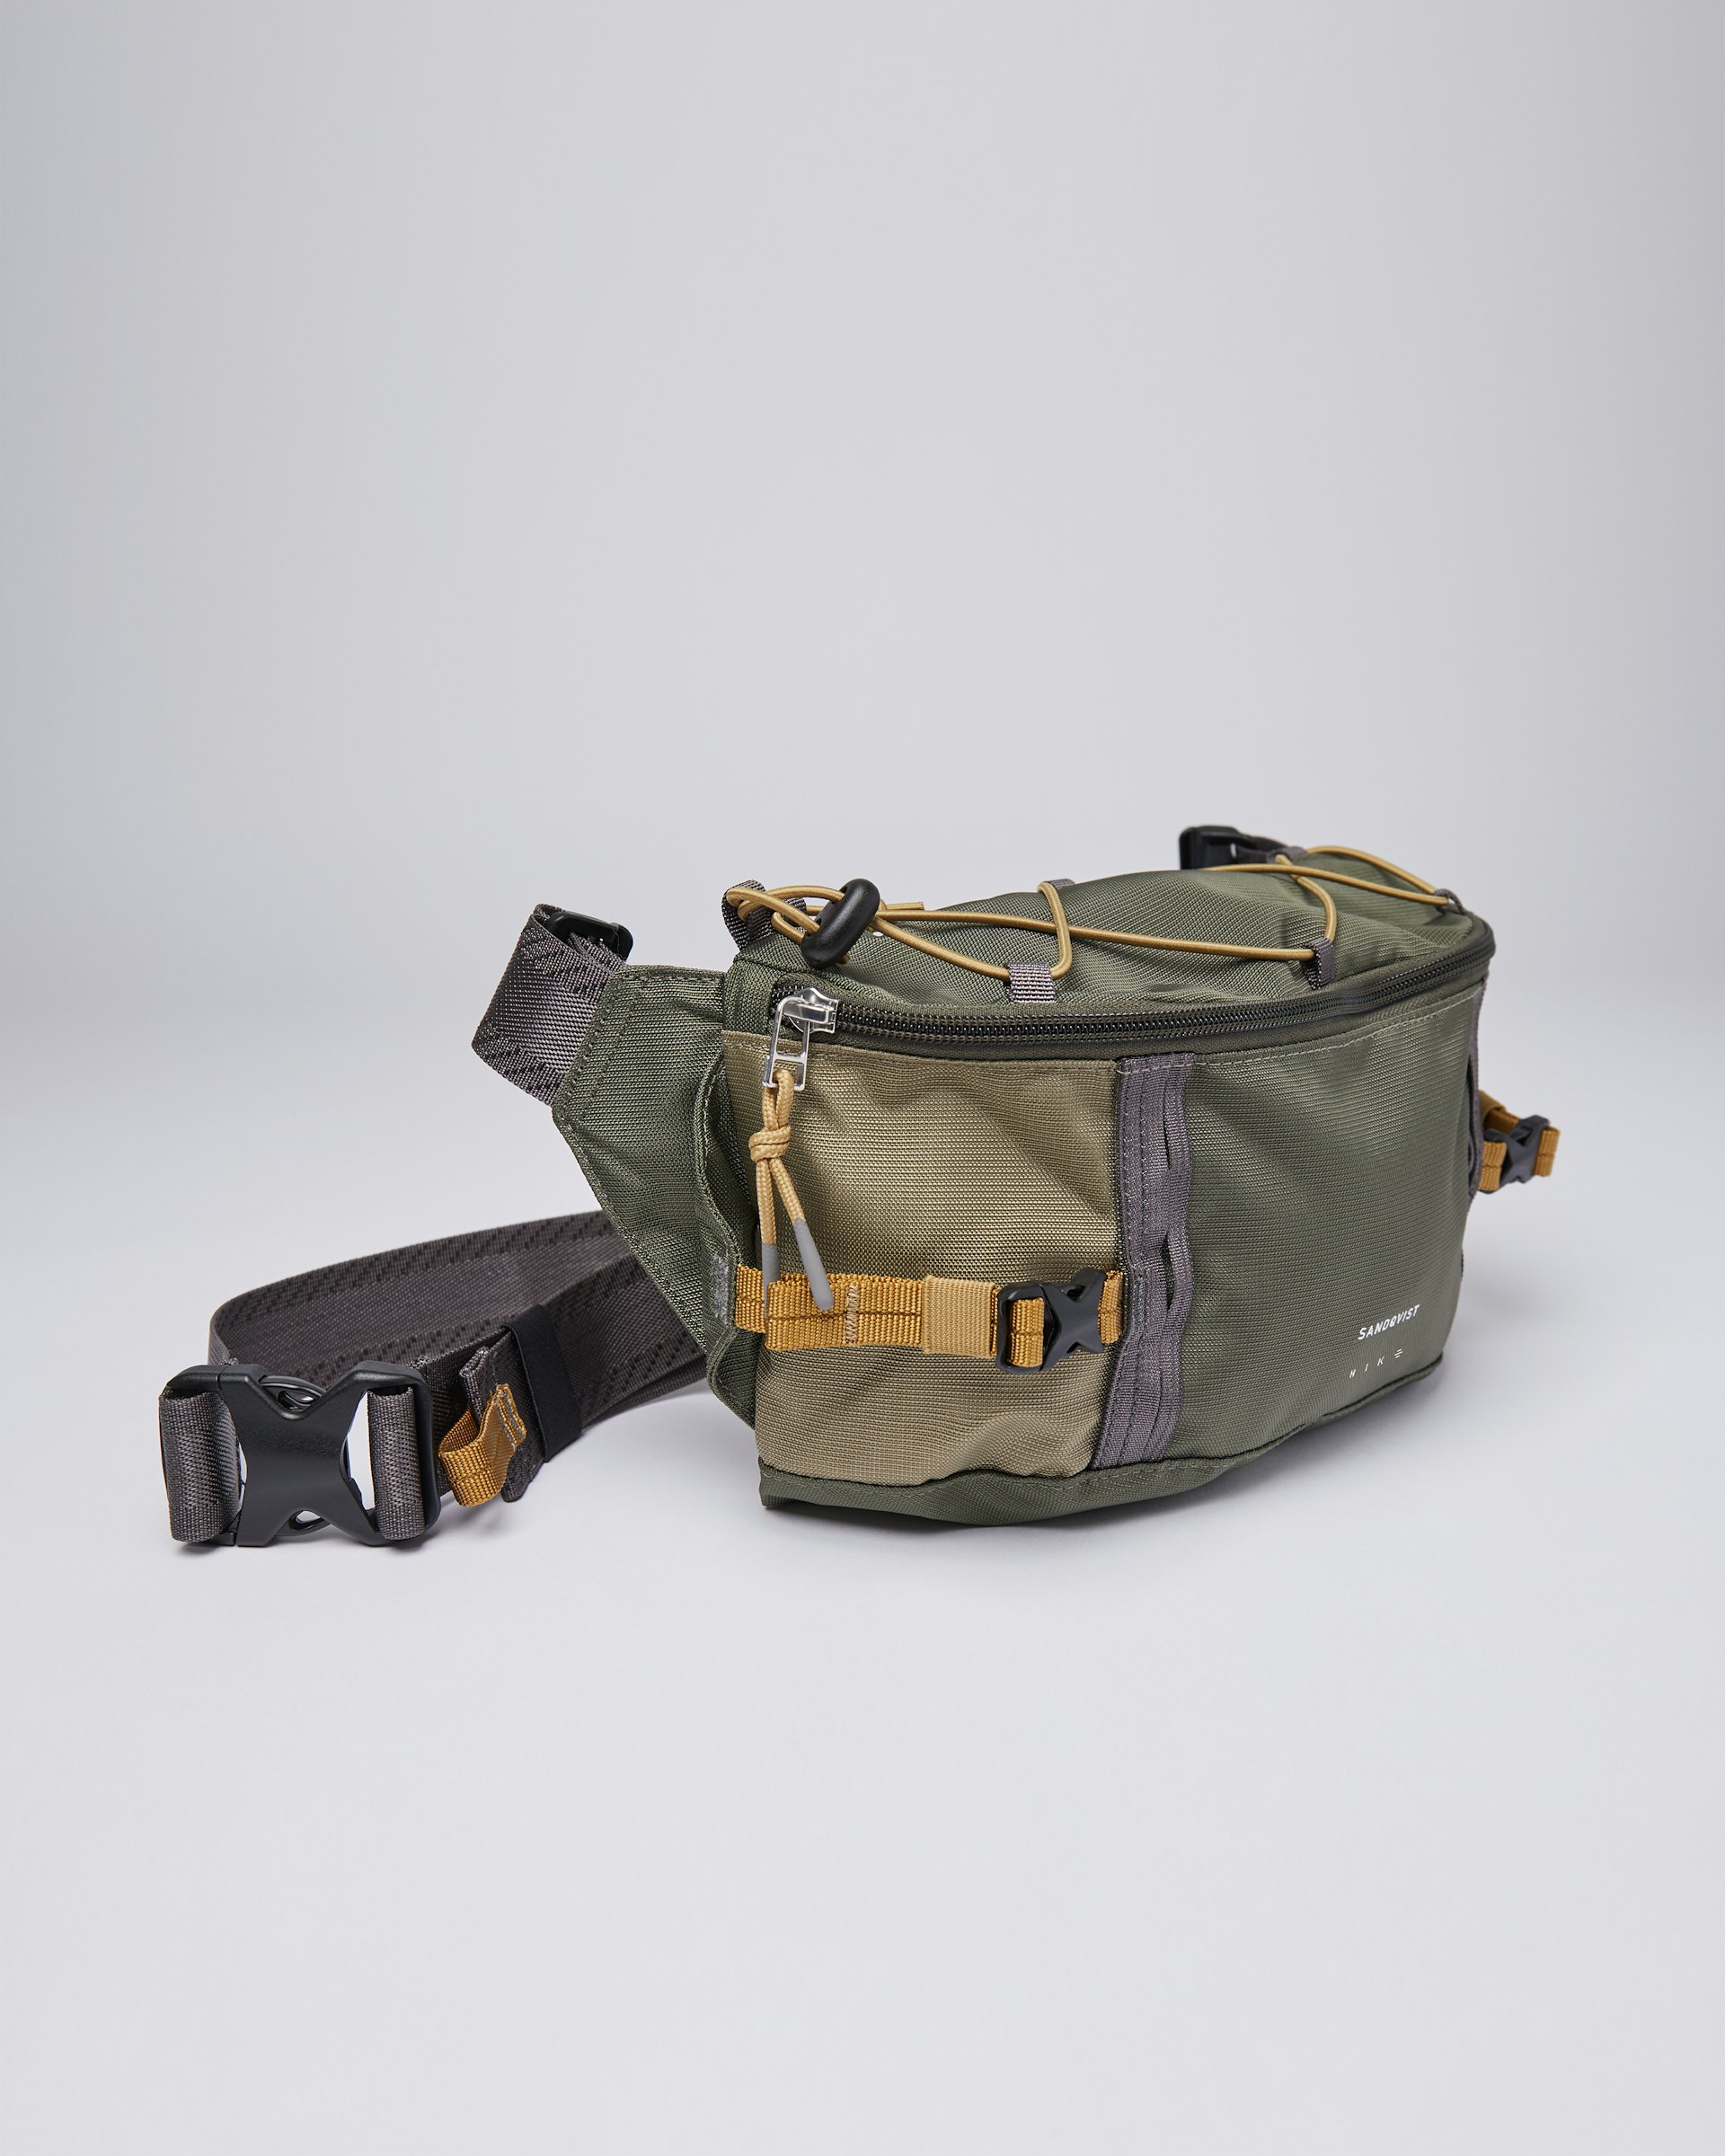 Allterrain Hike belongs to the category Bum bags and is in color green & green (4 of 7)